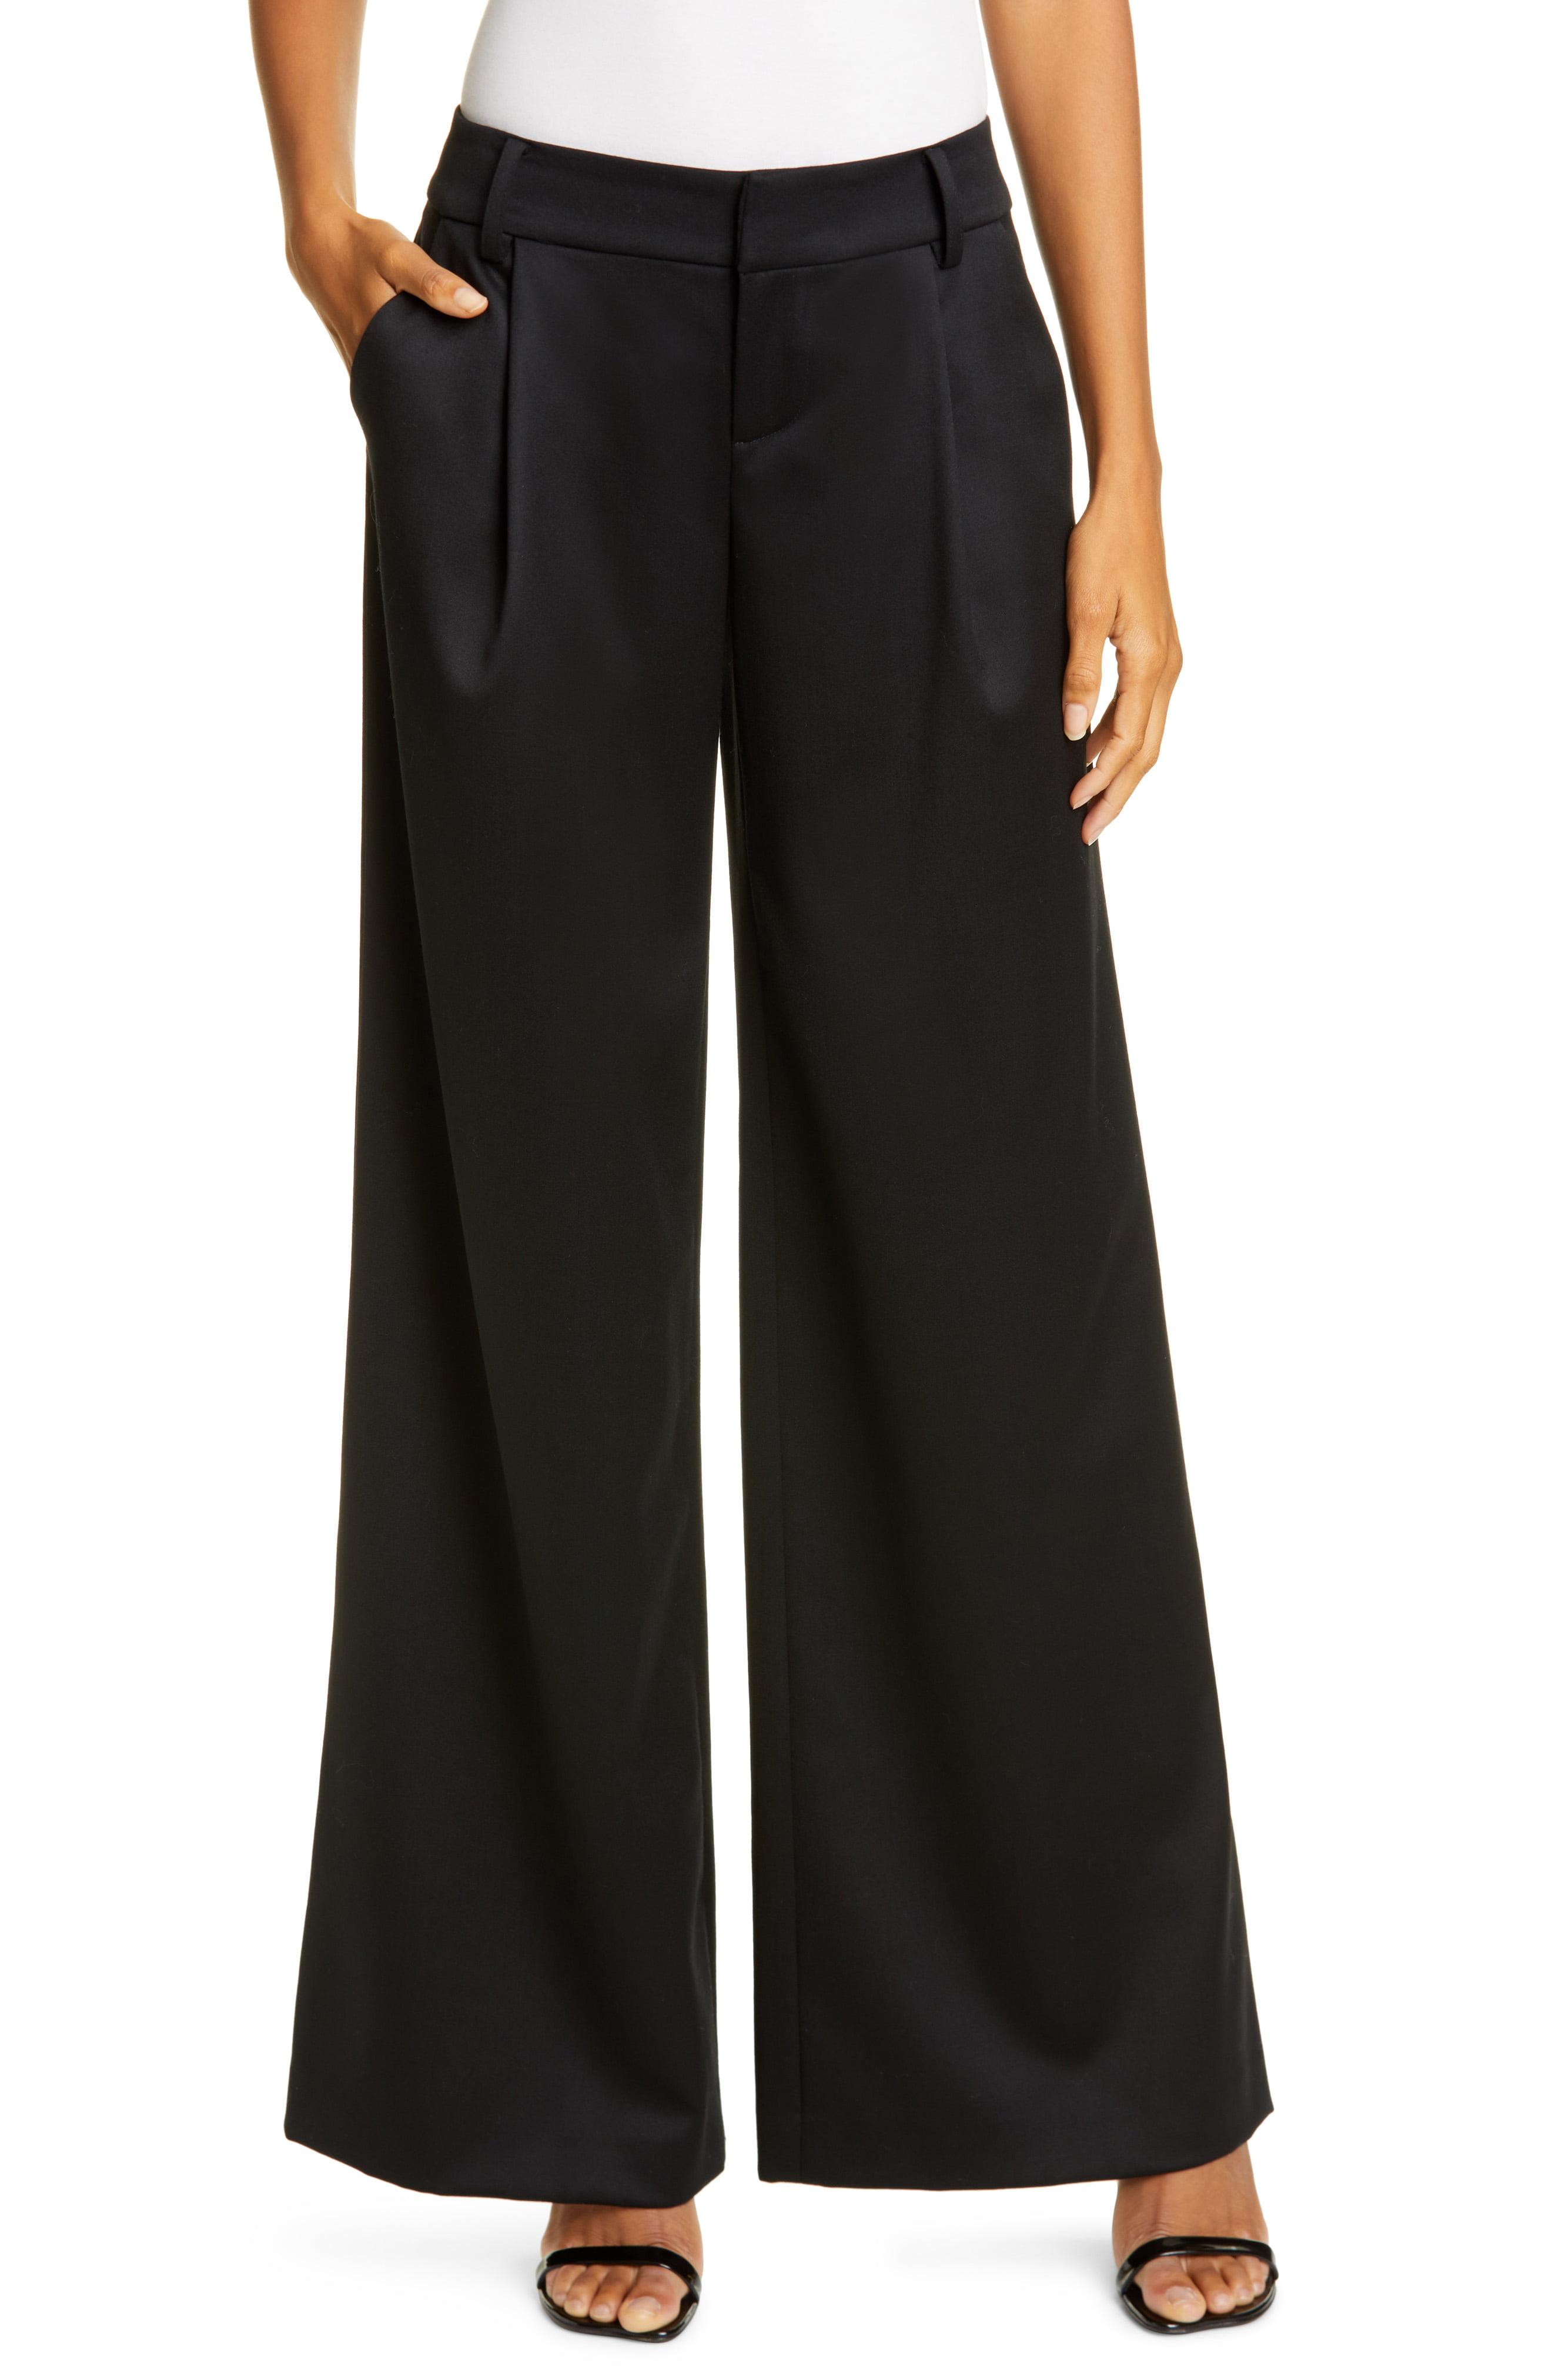 Alice + Olivia Eric Front Pleat Wide Leg Pants in Black | Lyst